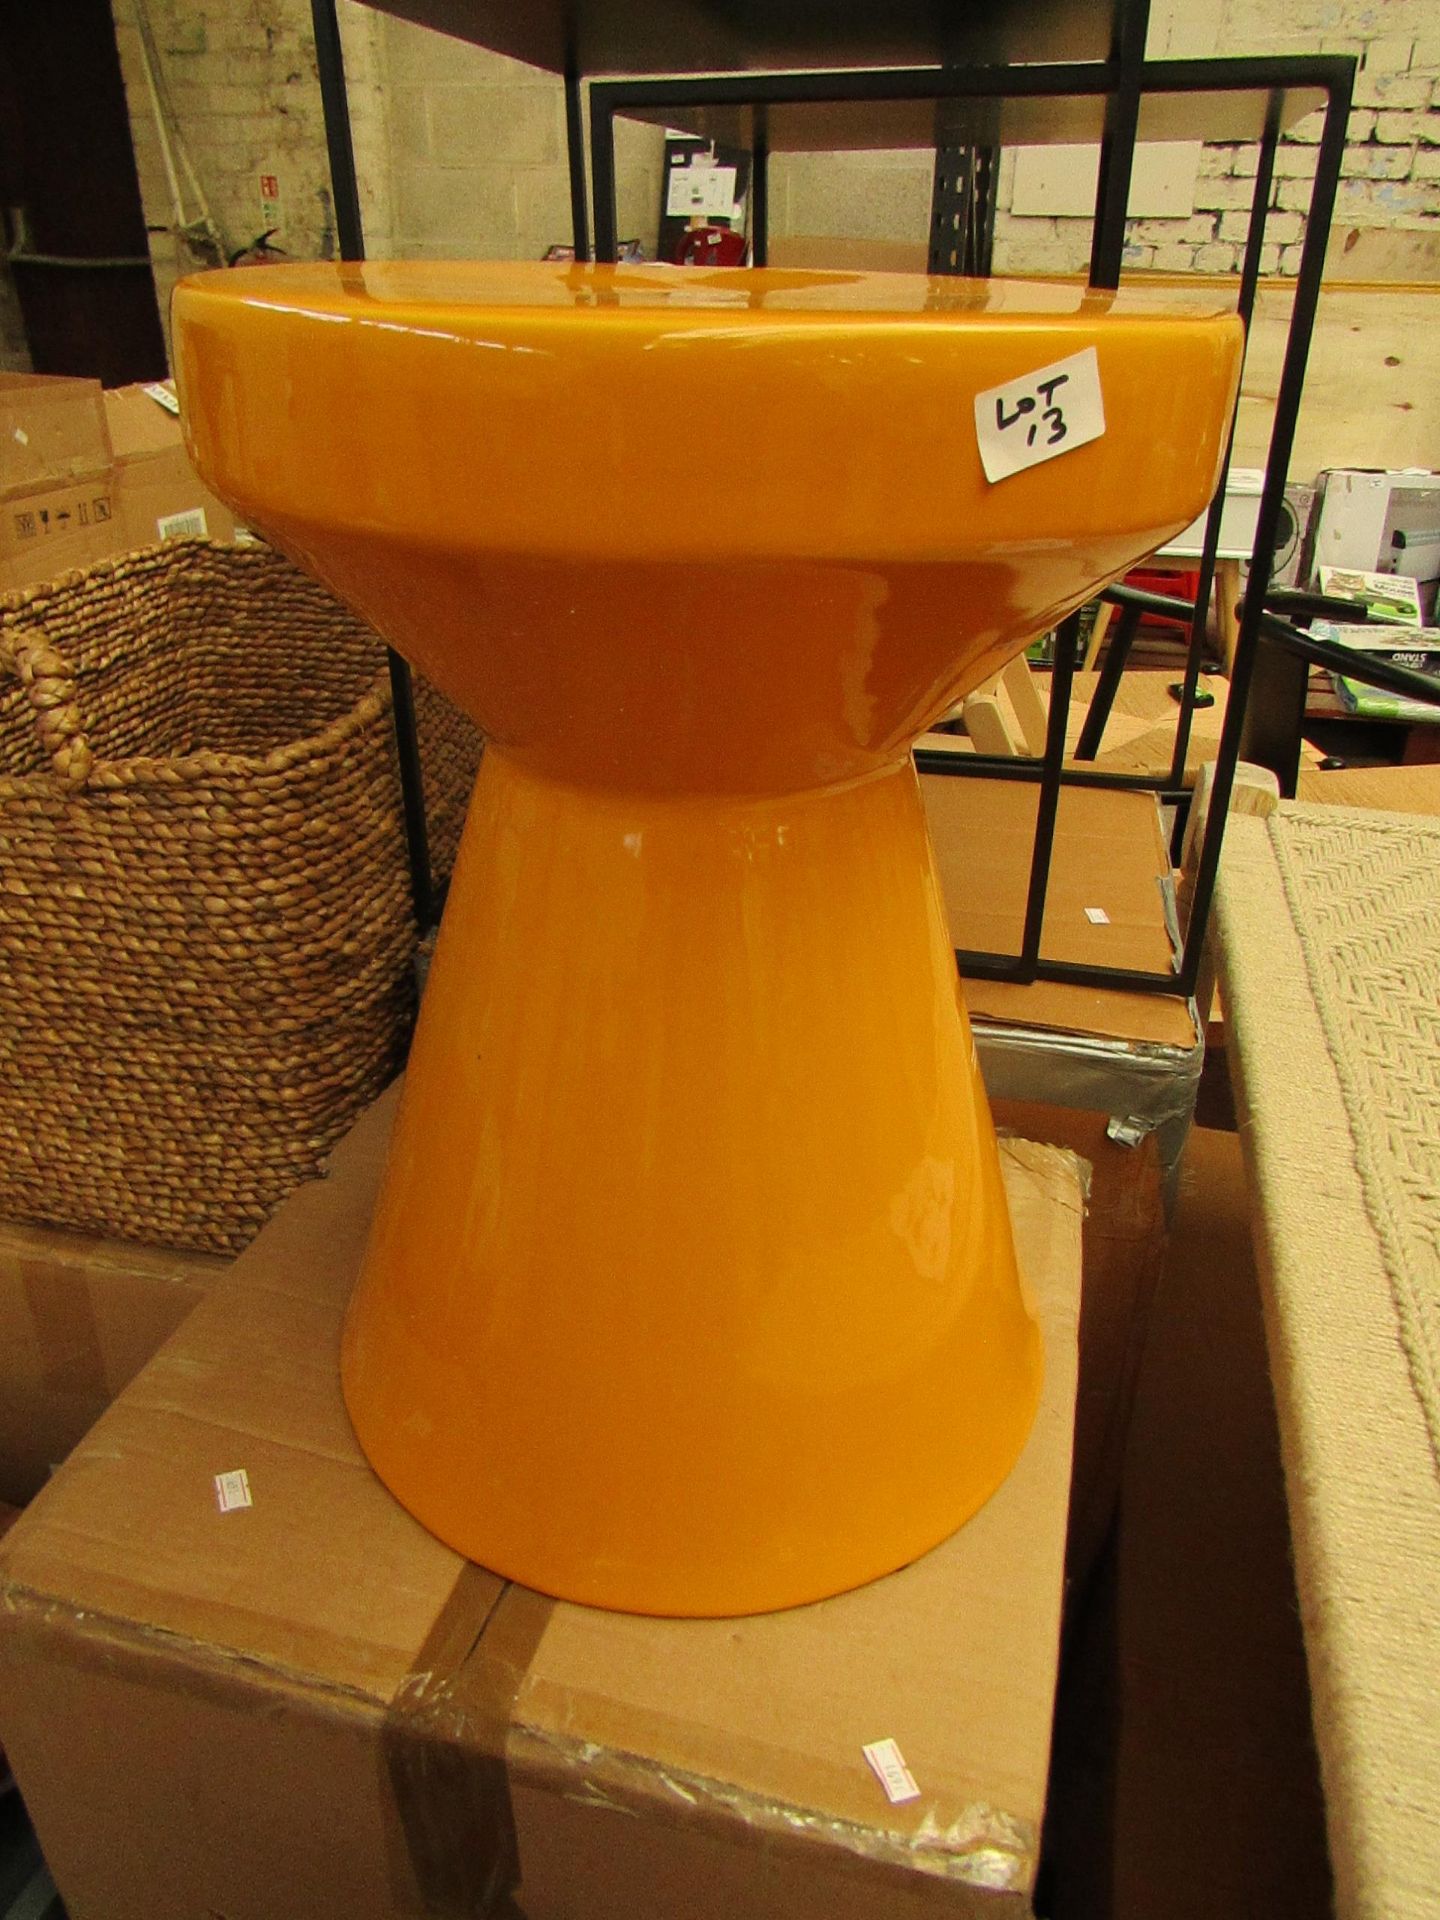 La Redoute Mustard Side Table. Has a small chip on the top but nothing major. RRP £99